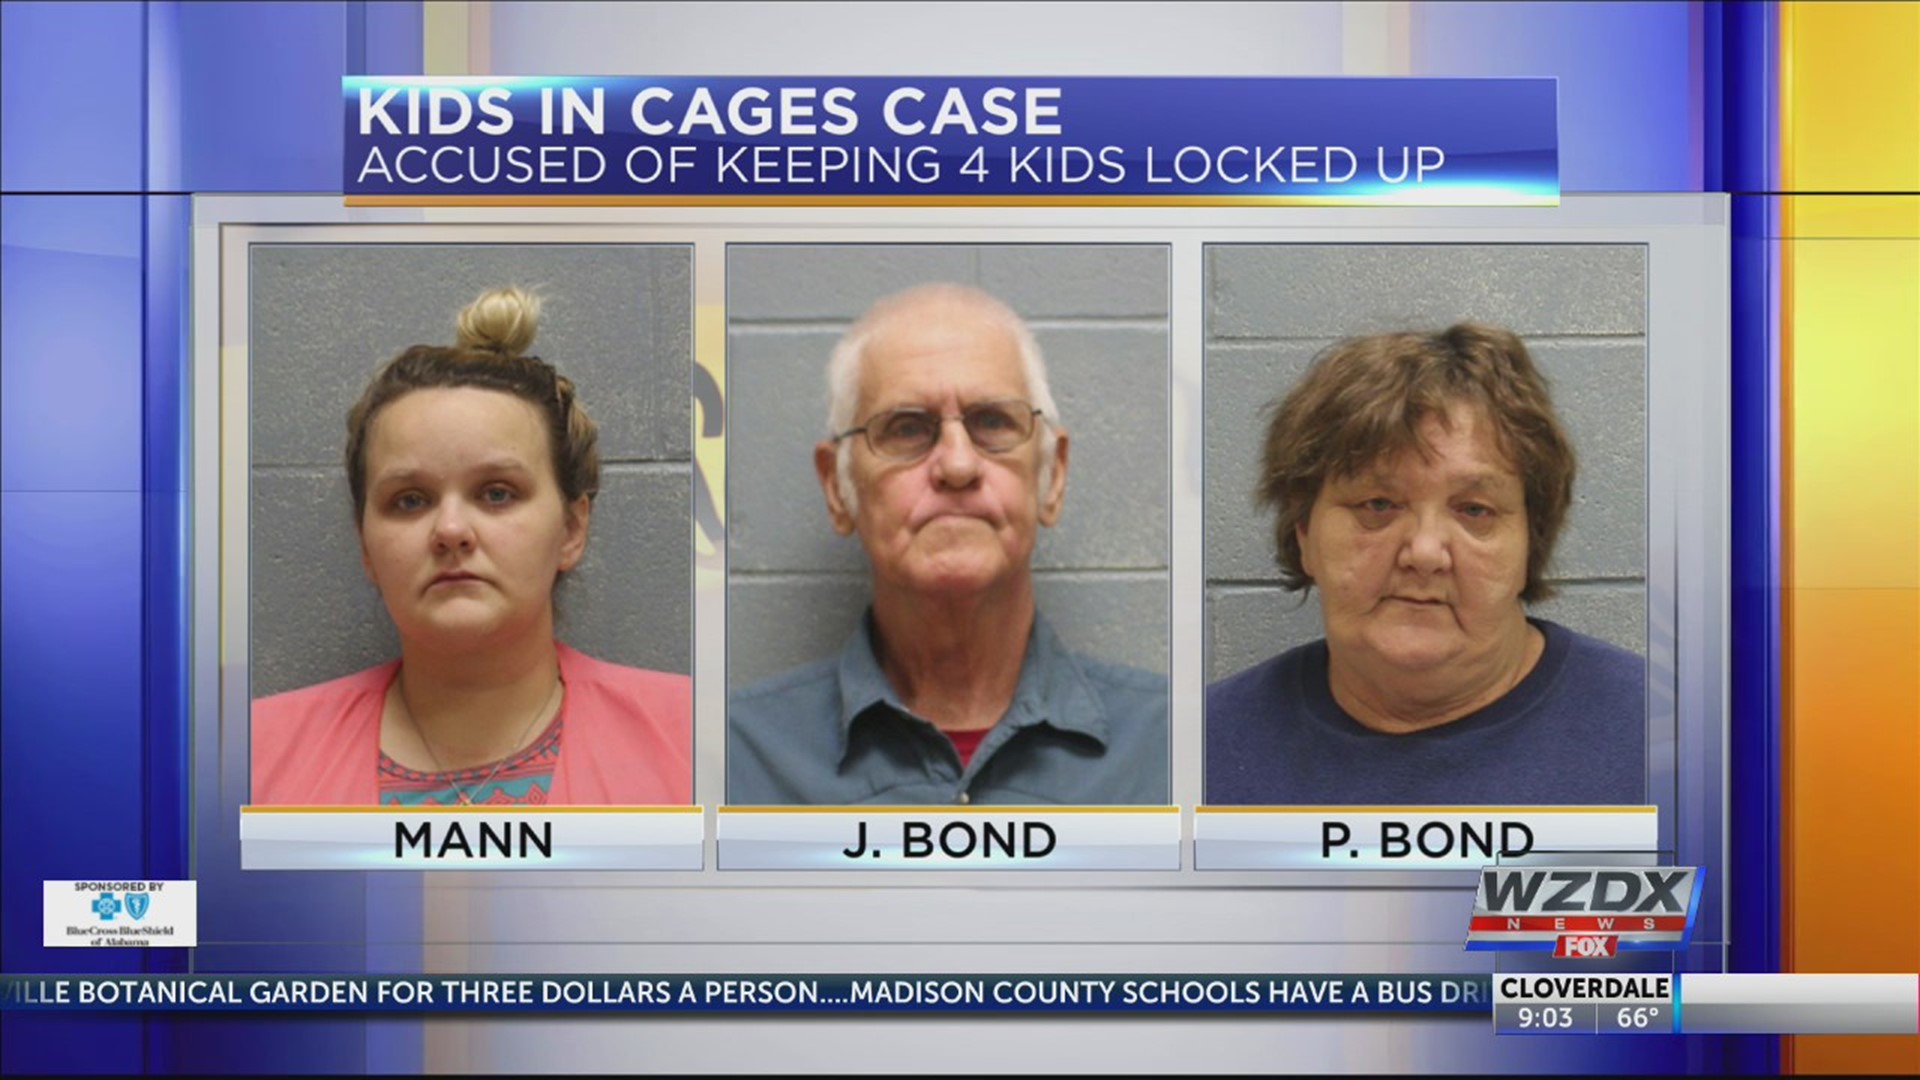 Three people have been arrested for aggravated child abuse after investigators discovered children living at a residence had been locked in cages on multiple occasions.